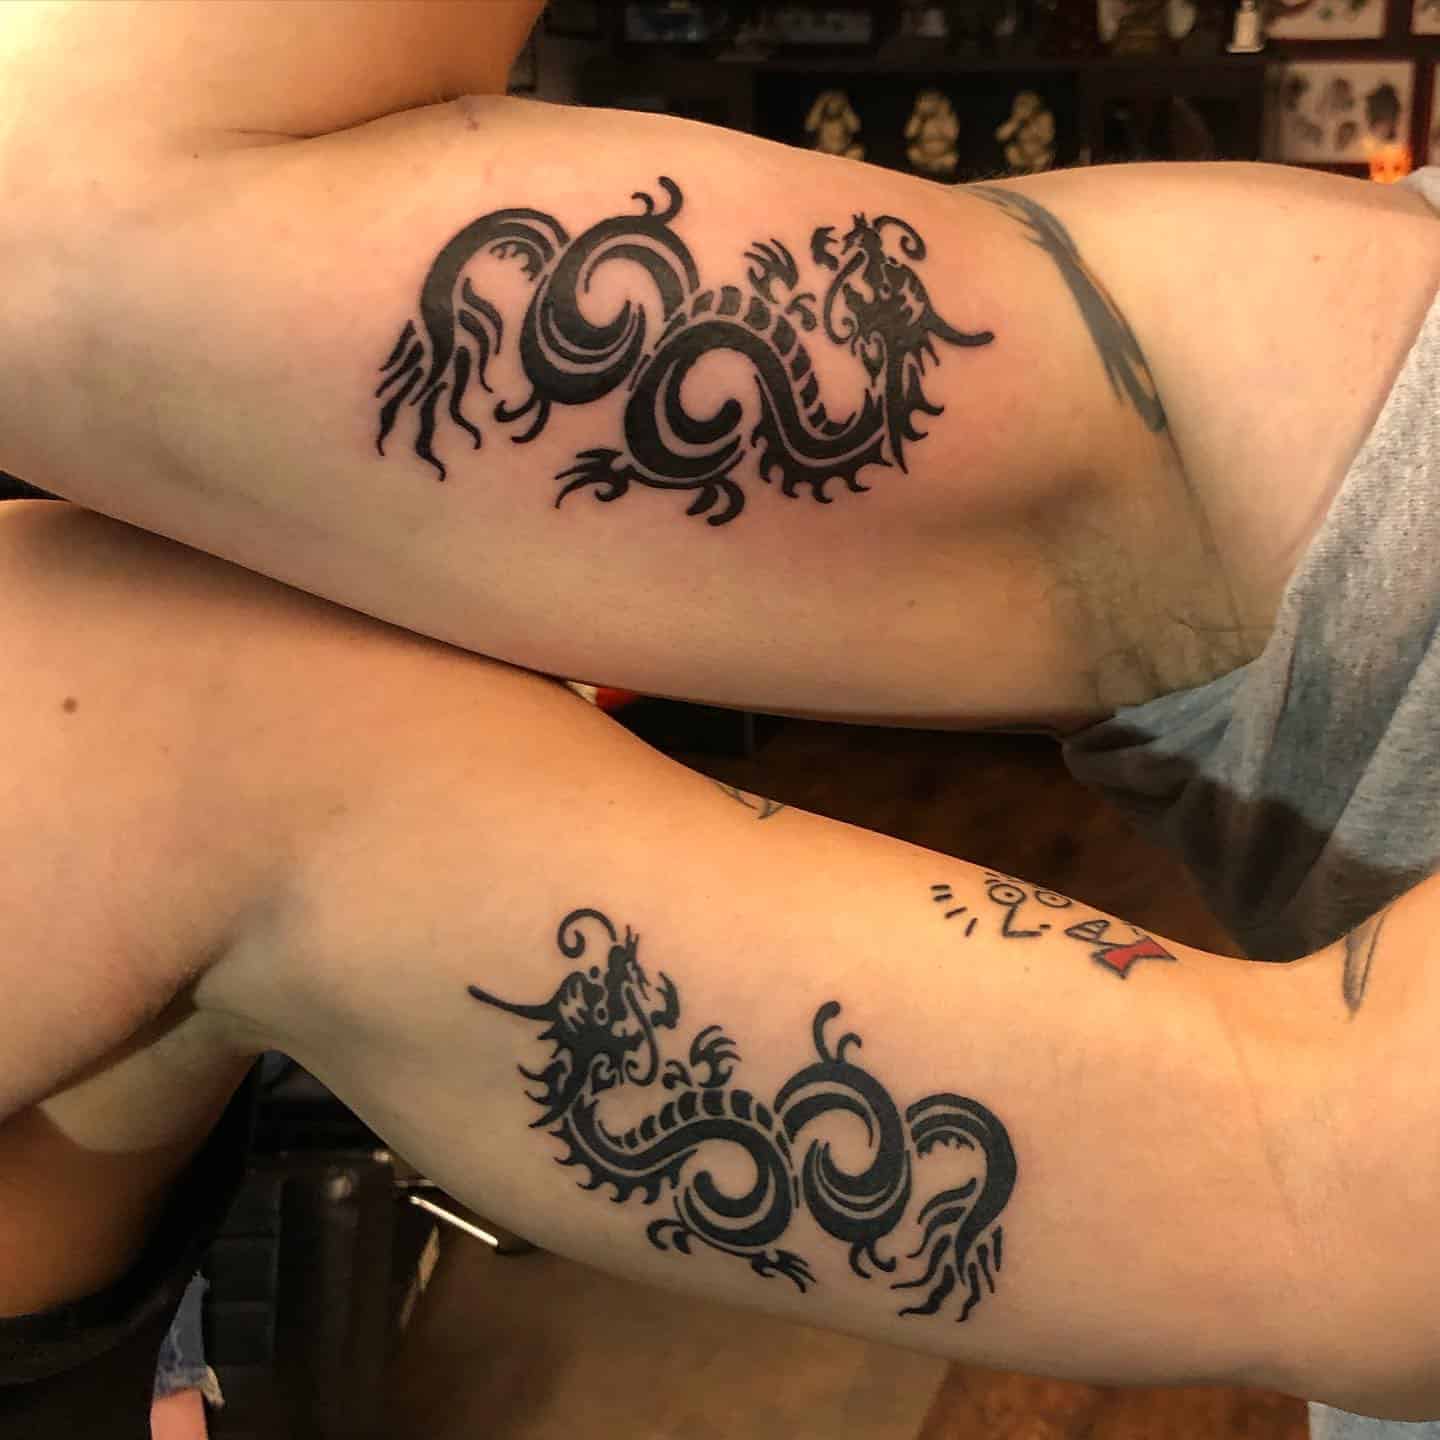 Where Should I Get My Father Daughter Tattoo